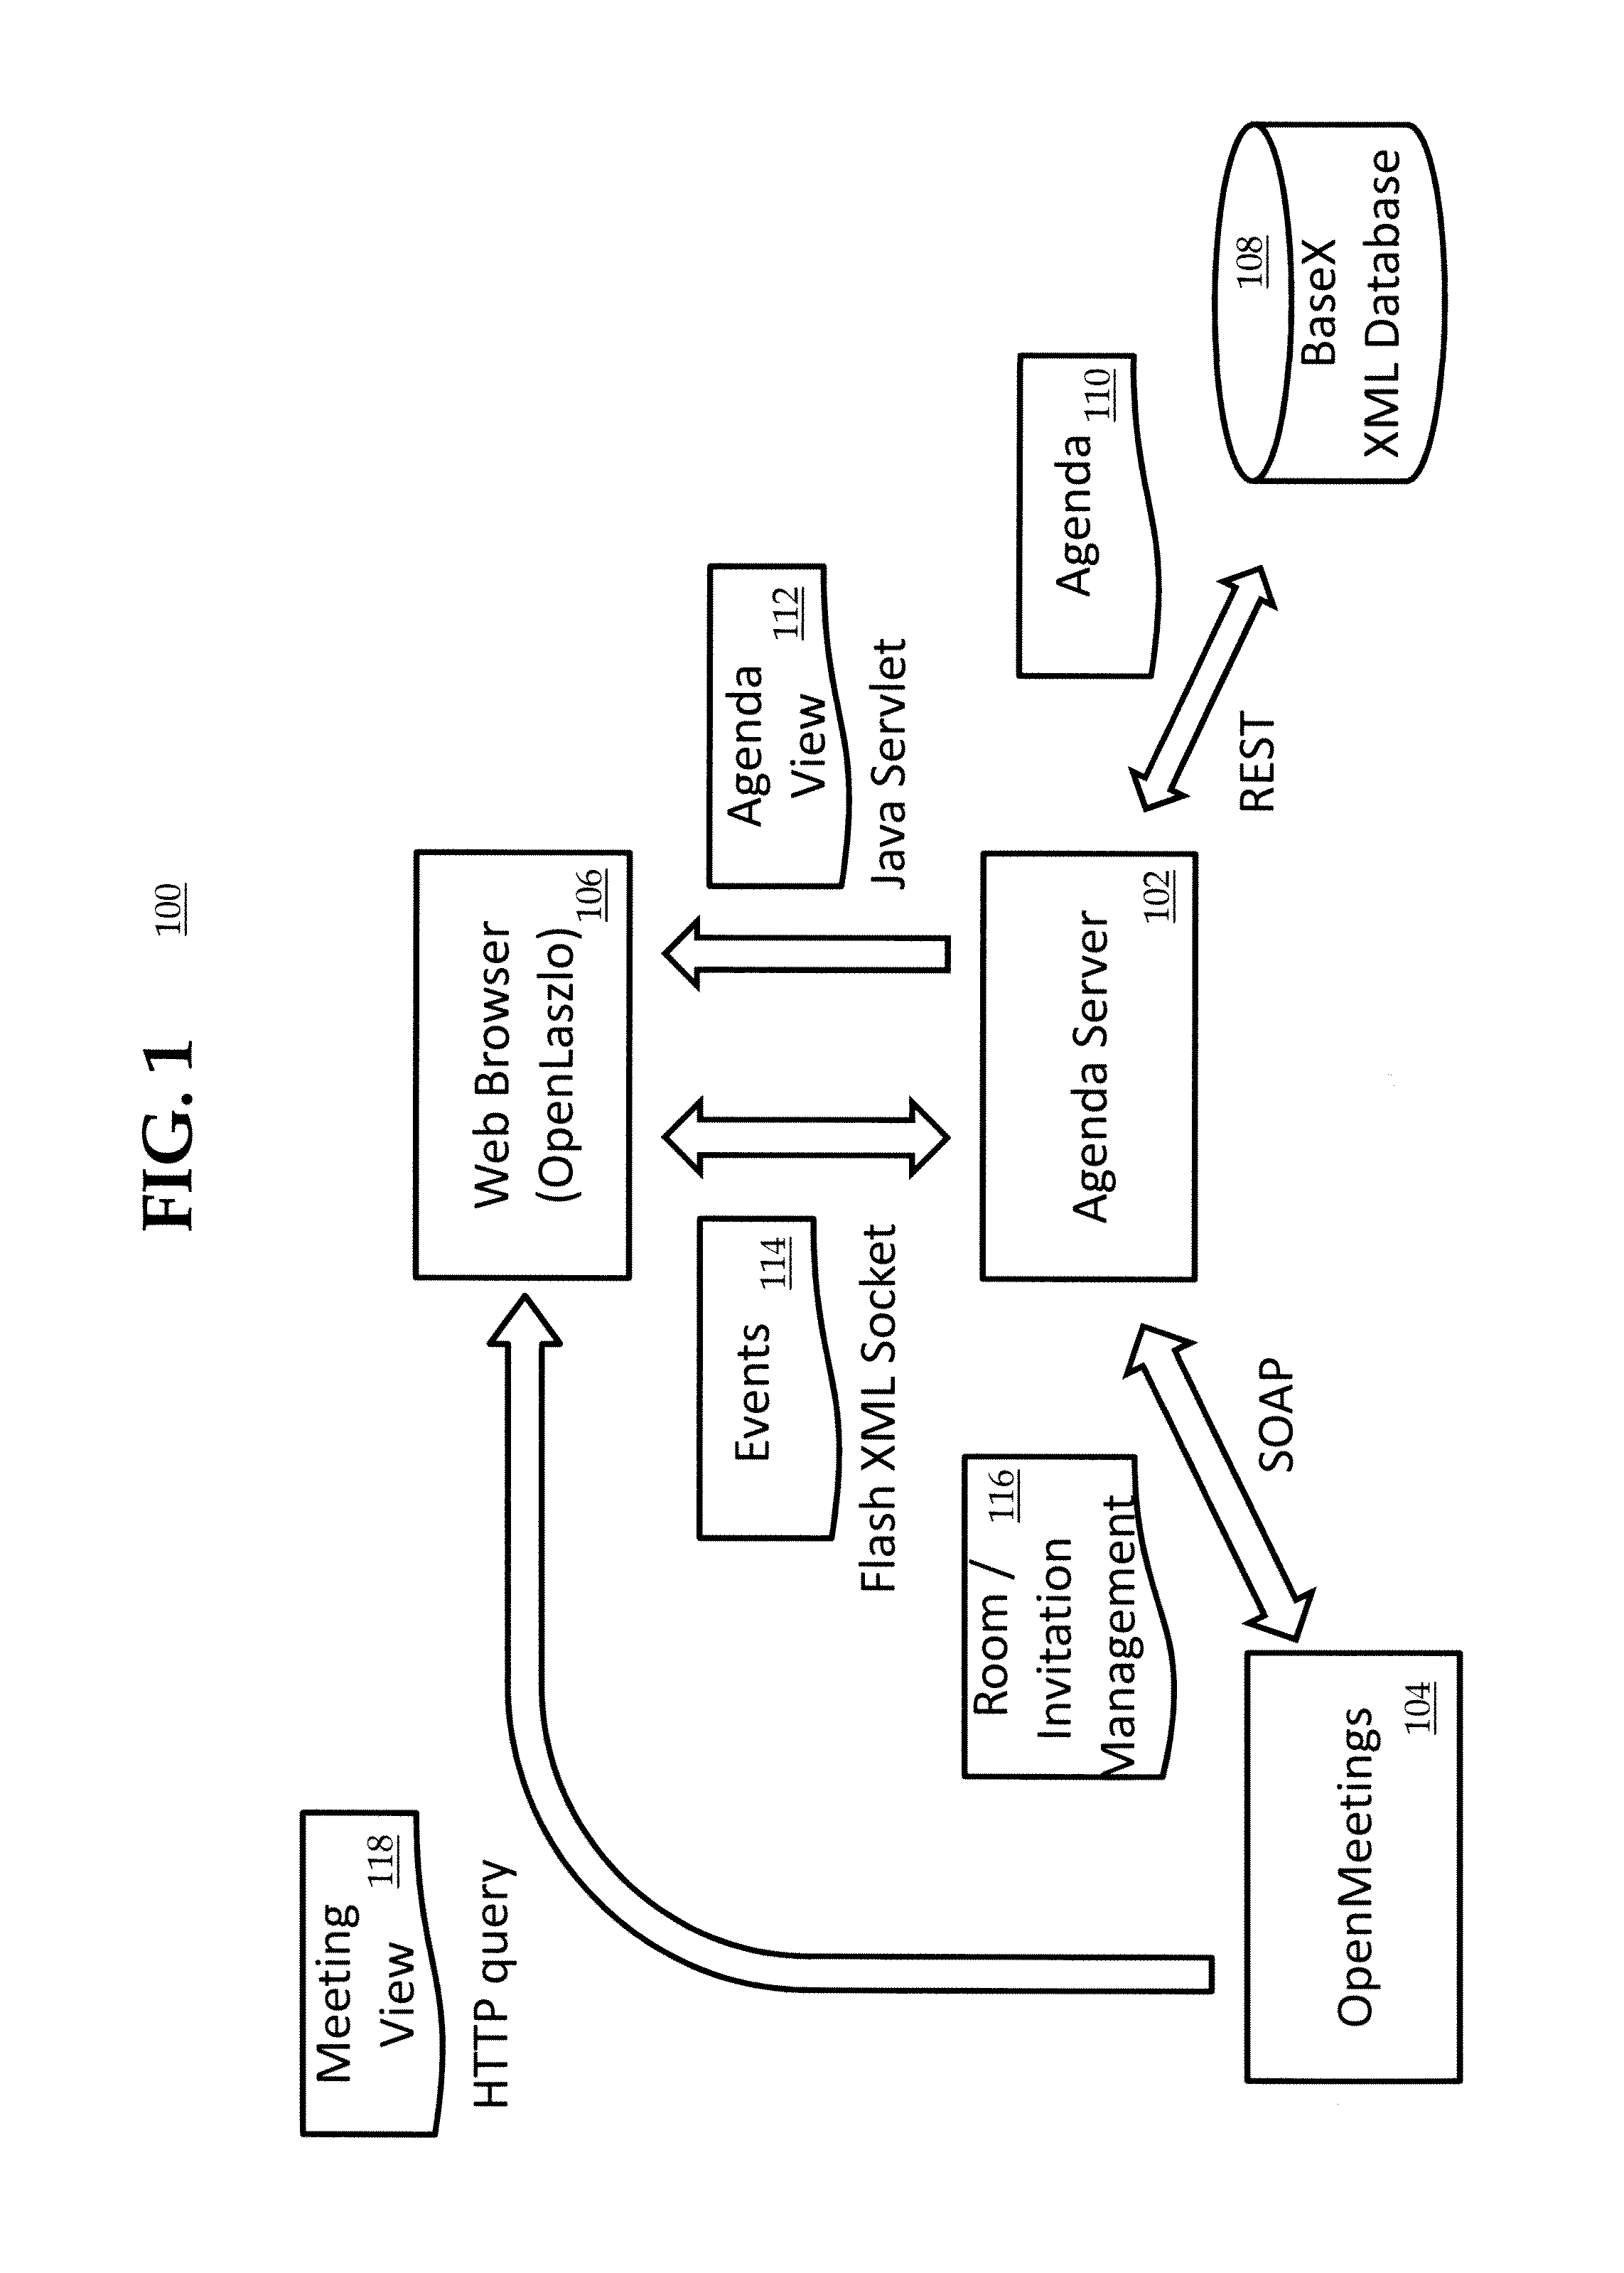 System and method for concurrent electronic conferences